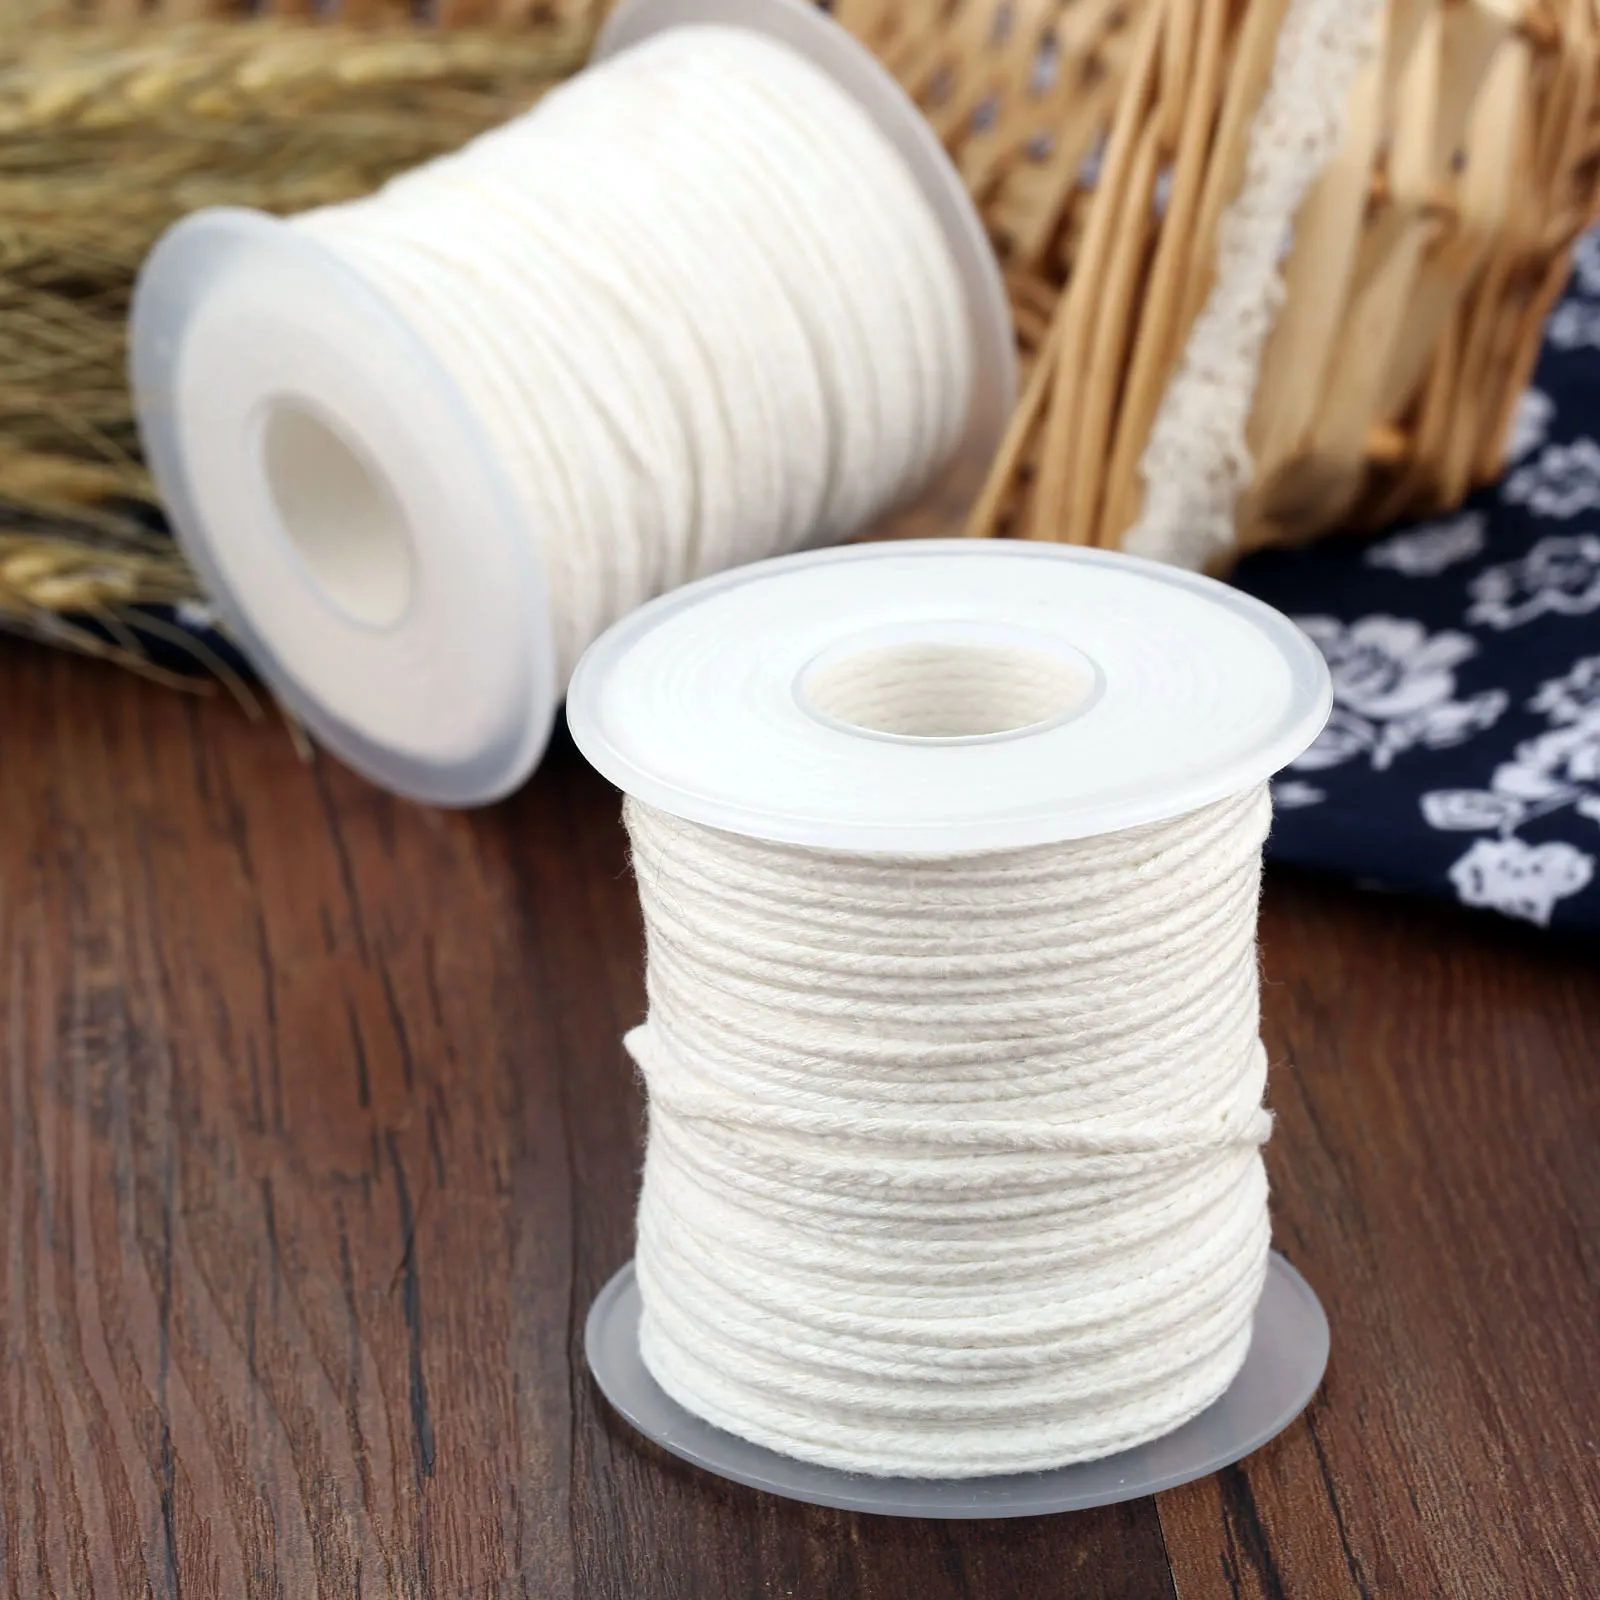 Cotton Wicks For Candles 2 Rolls Braided Cotton Candle Wicks DIY Candle  Making Supplies For Valentines Day Candle Wick Clips - AliExpress